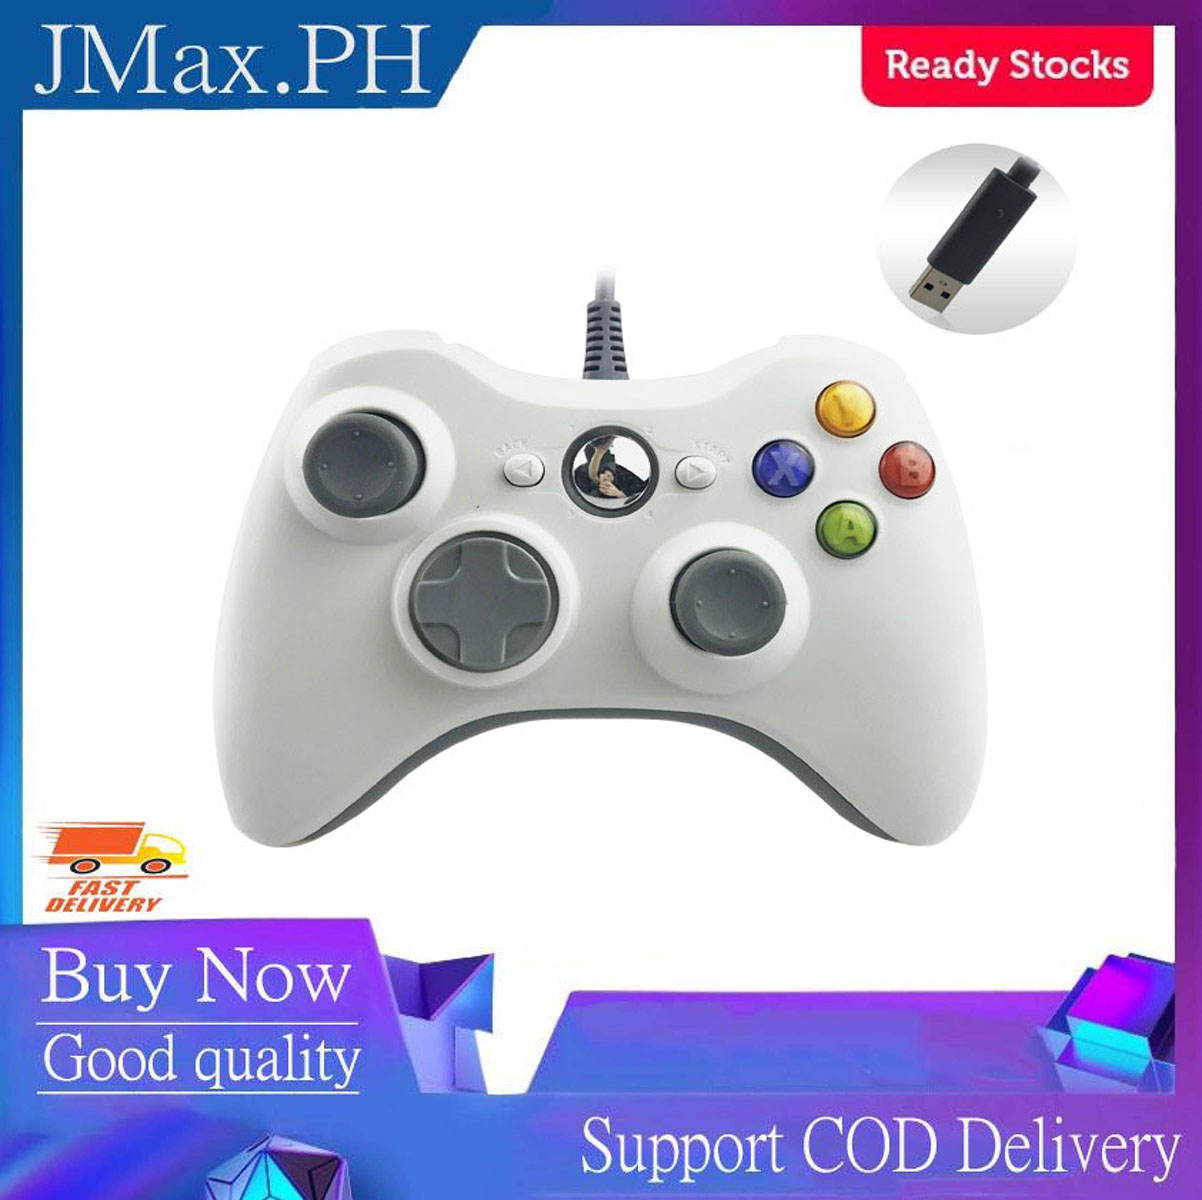 xbox controller for pc lazada